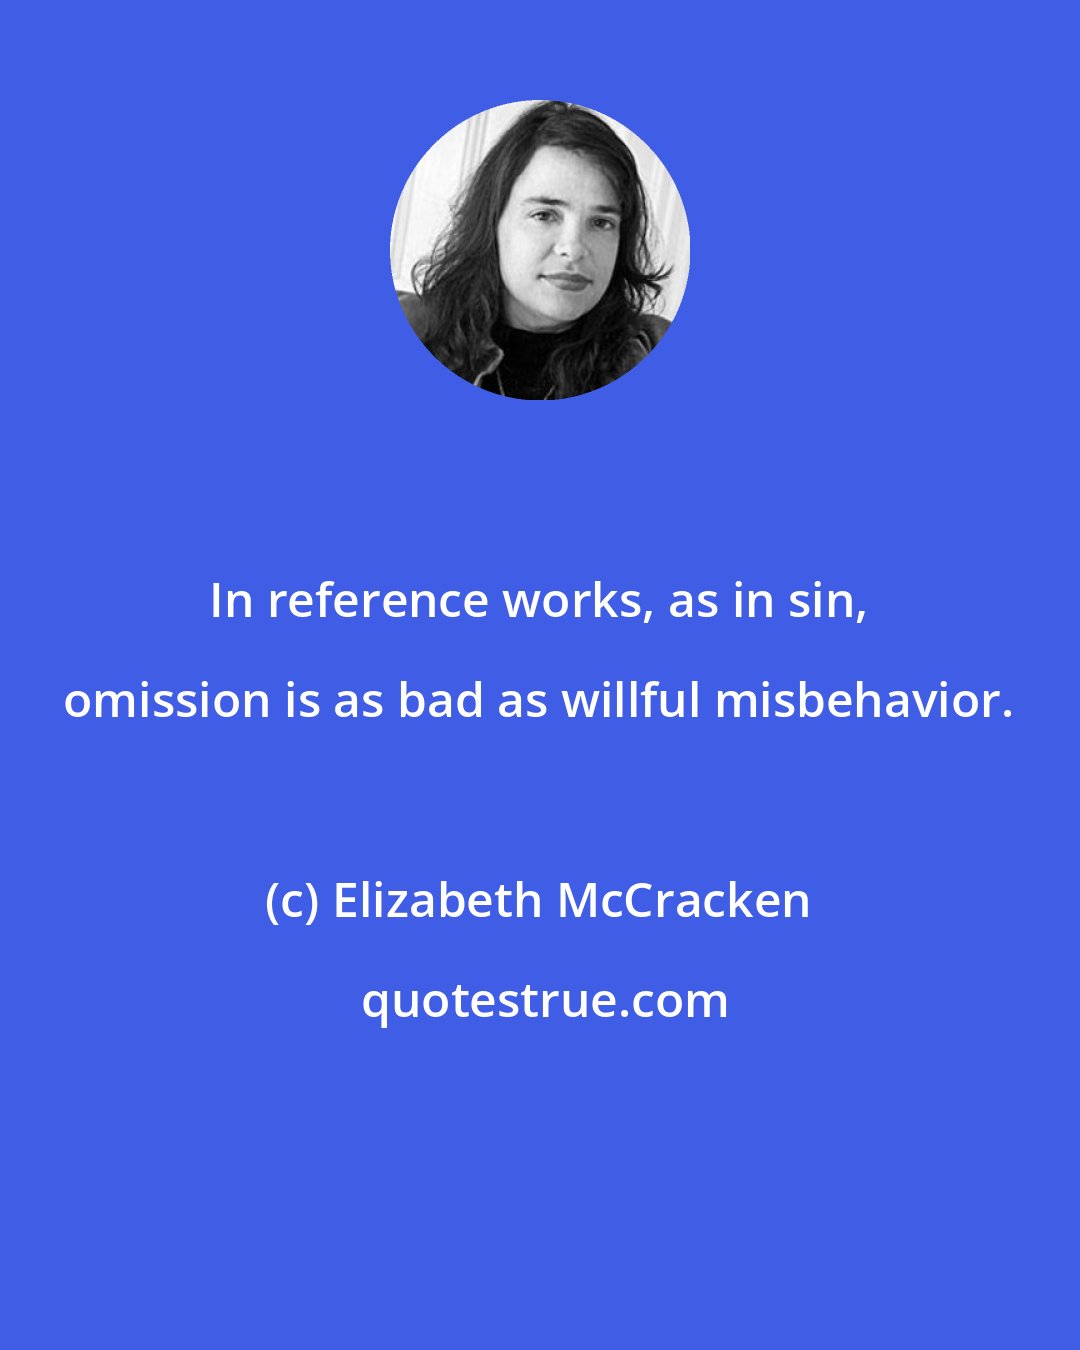 Elizabeth McCracken: In reference works, as in sin, omission is as bad as willful misbehavior.